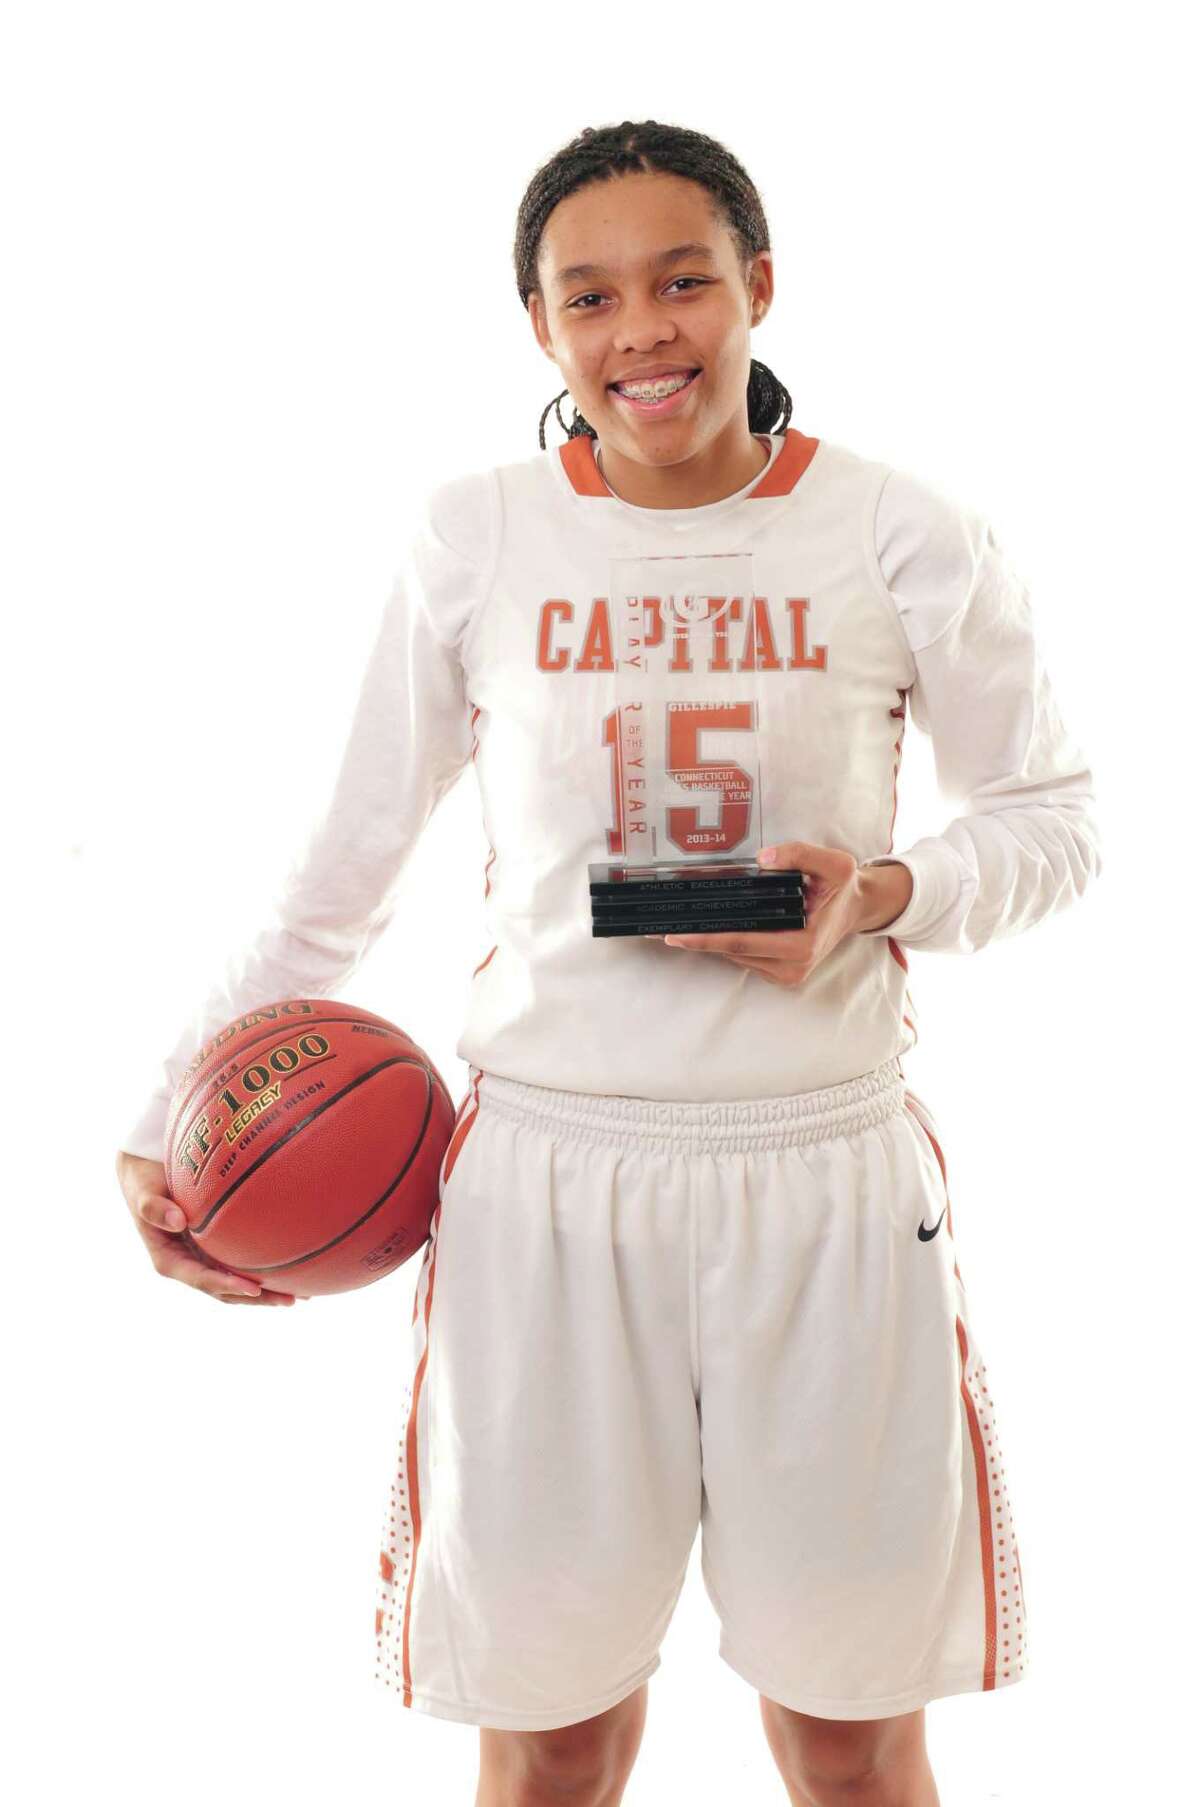 Capital Prep’s Kiah Gillespie is the Gatorade State Player of the Year.